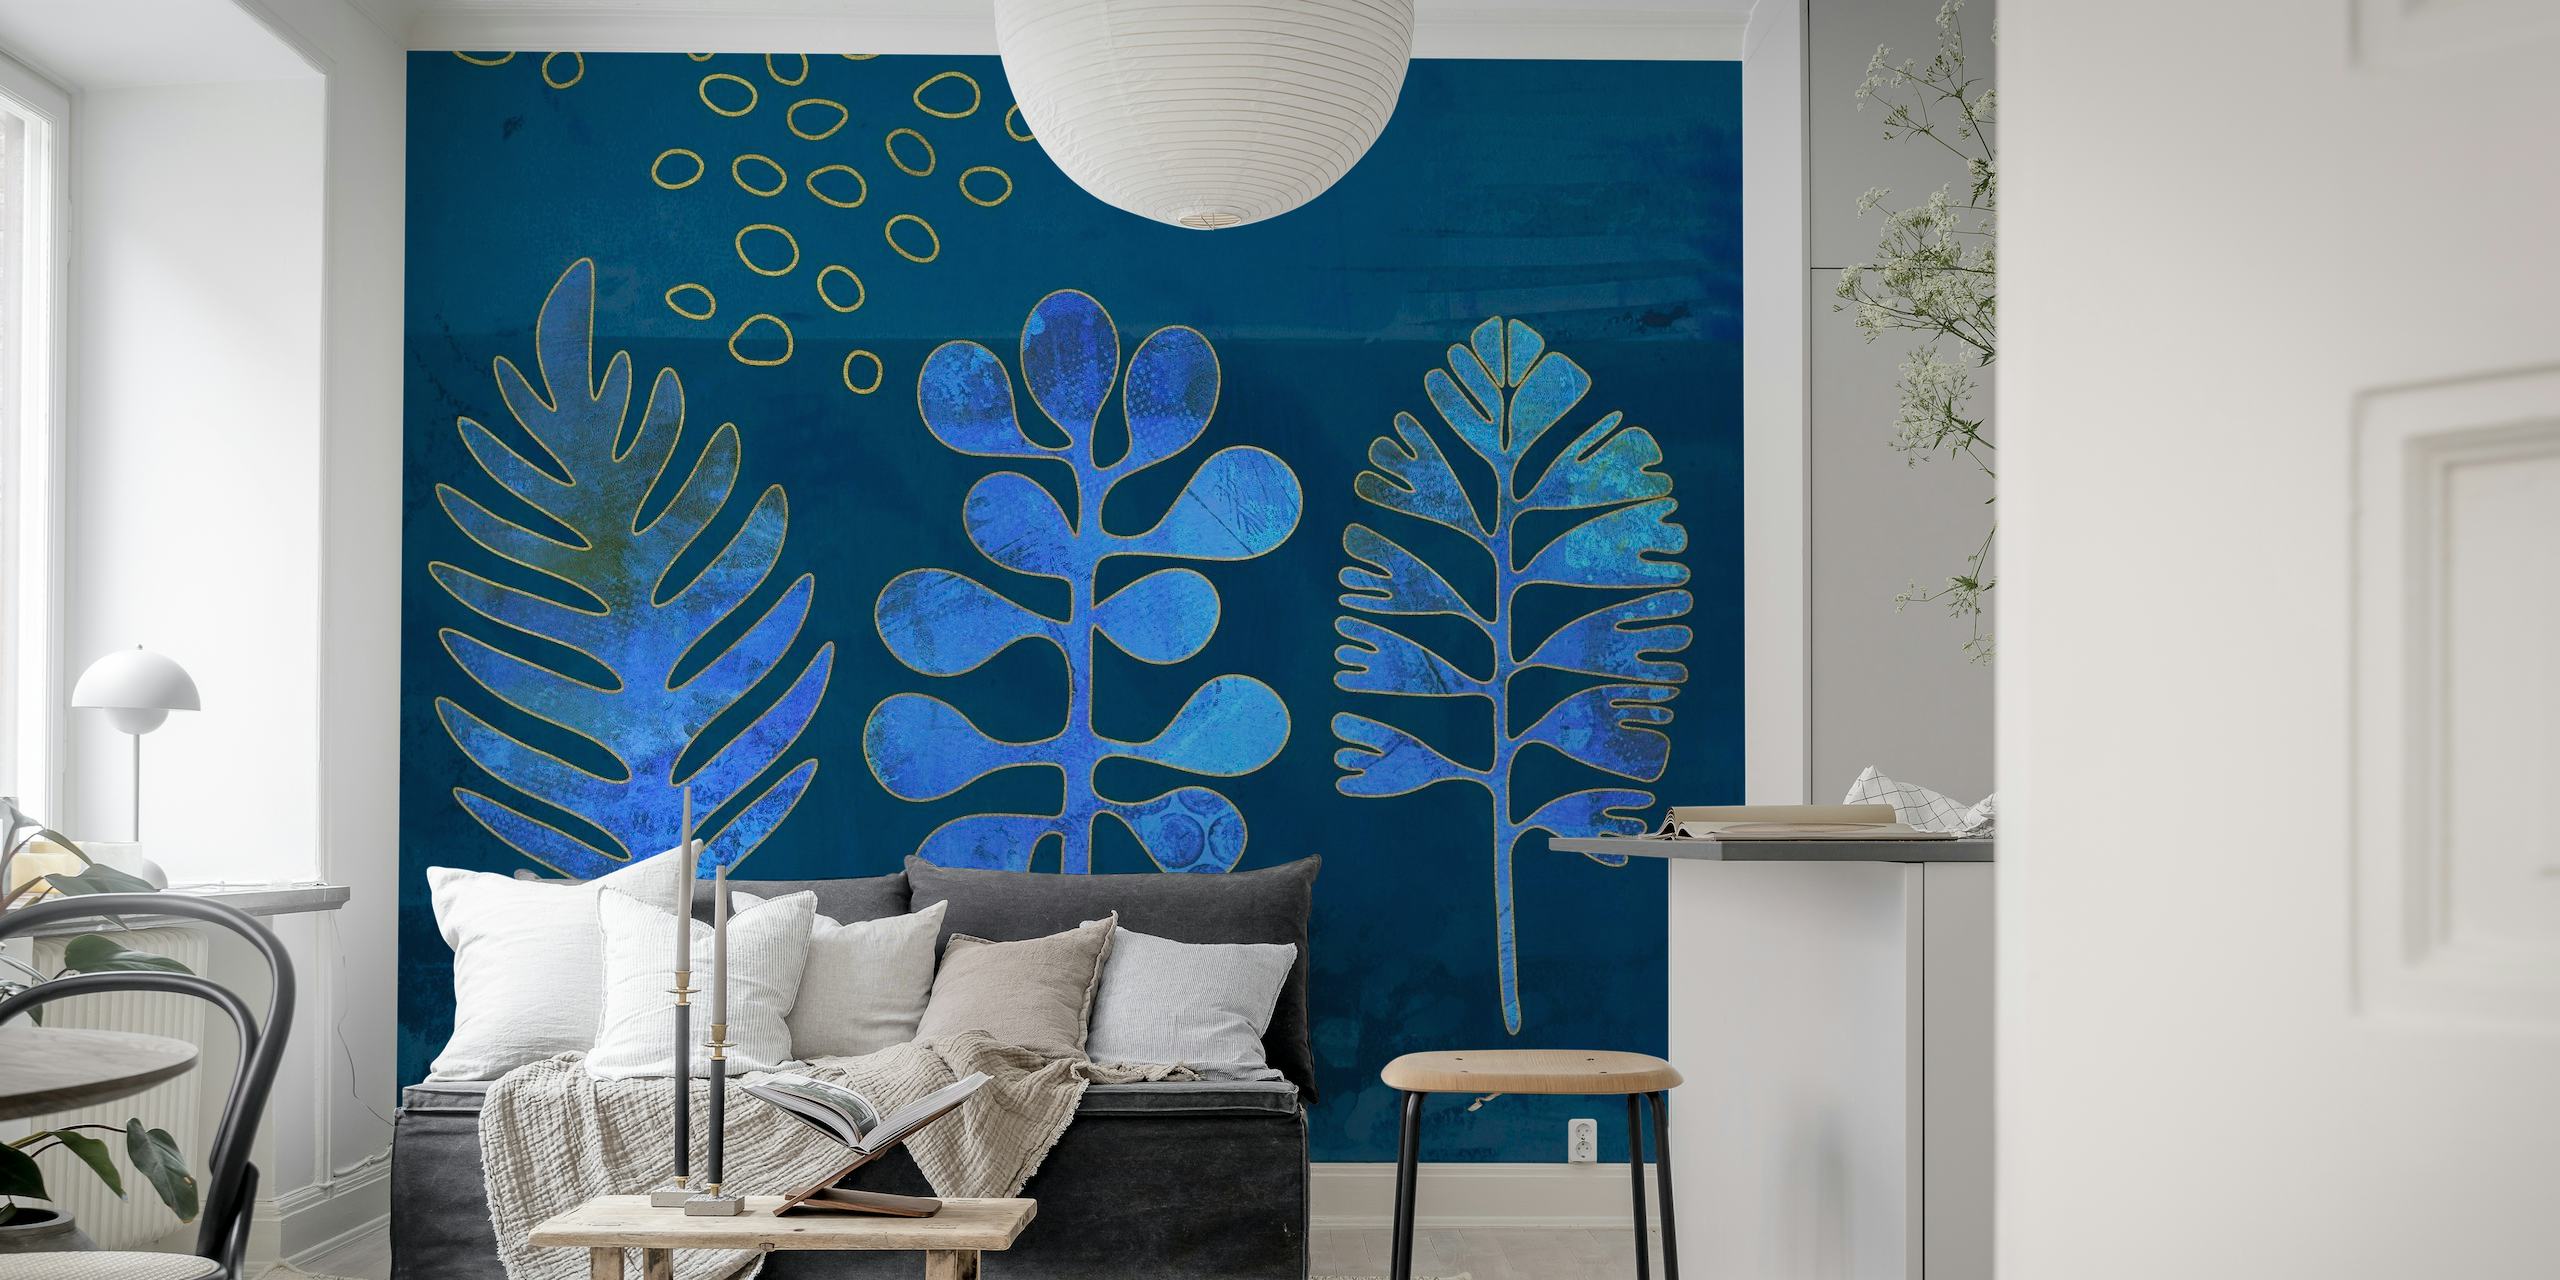 Whimsical Plant Shapes Mixed Media Art Blue ταπετσαρία